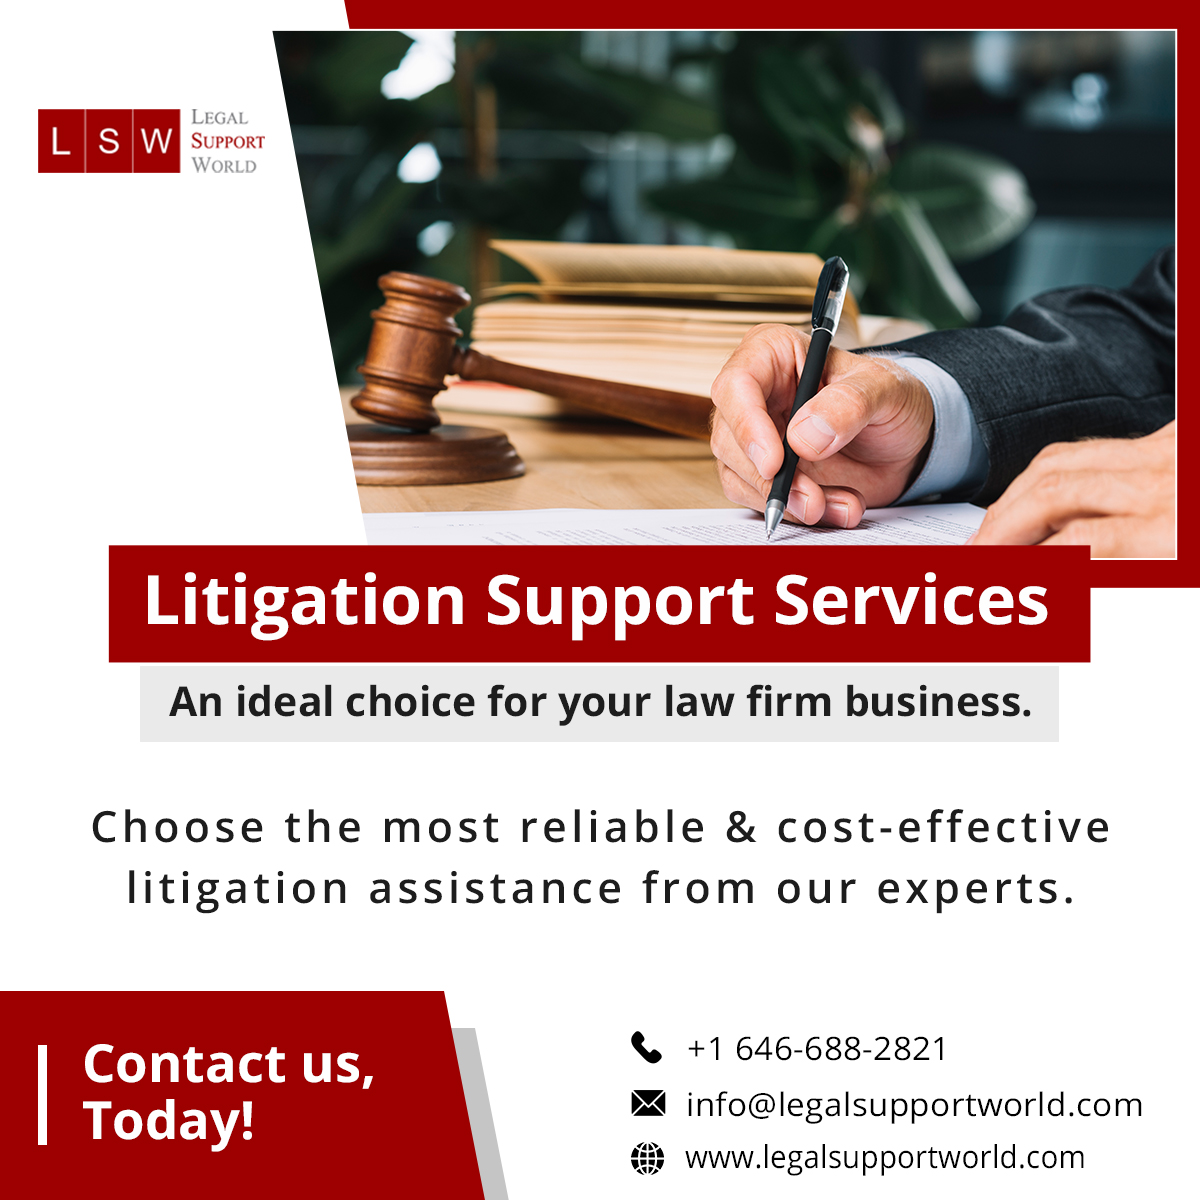 Litigation Support Services

An ideal choice for your law firm business.

Choose the most reliable & cost-effective
litigation assistance from our experts.

& +1 646-688-2821

XX info@legalsupportworld.com

Contact us,

Today!

 

#8 www.legalsupportworld.com